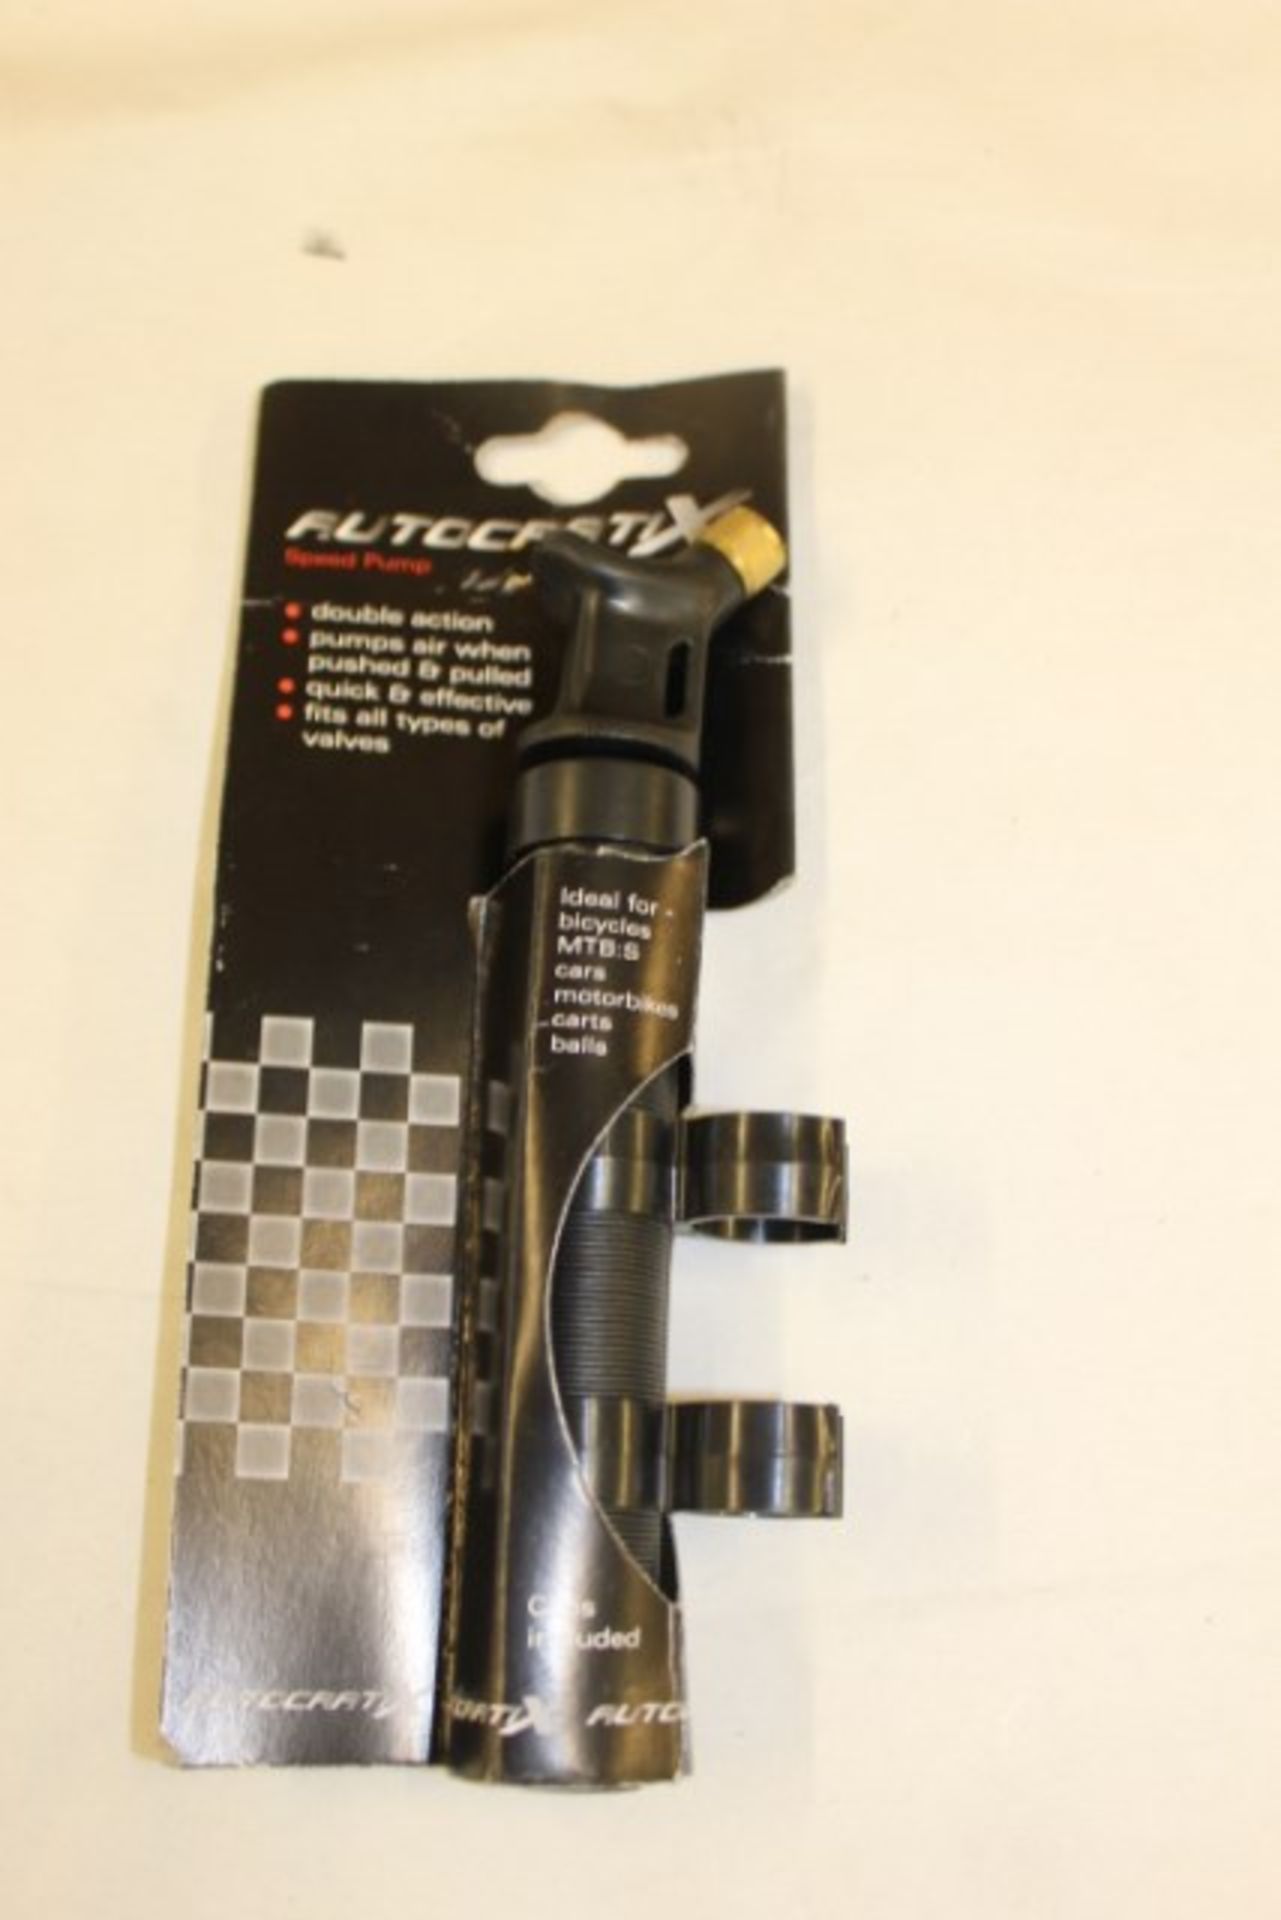 V Autocratix Double Action Bicycle Speed Pump X 2 YOUR BID PRICE TO BE MULTIPLIED BY TWO - Image 2 of 2